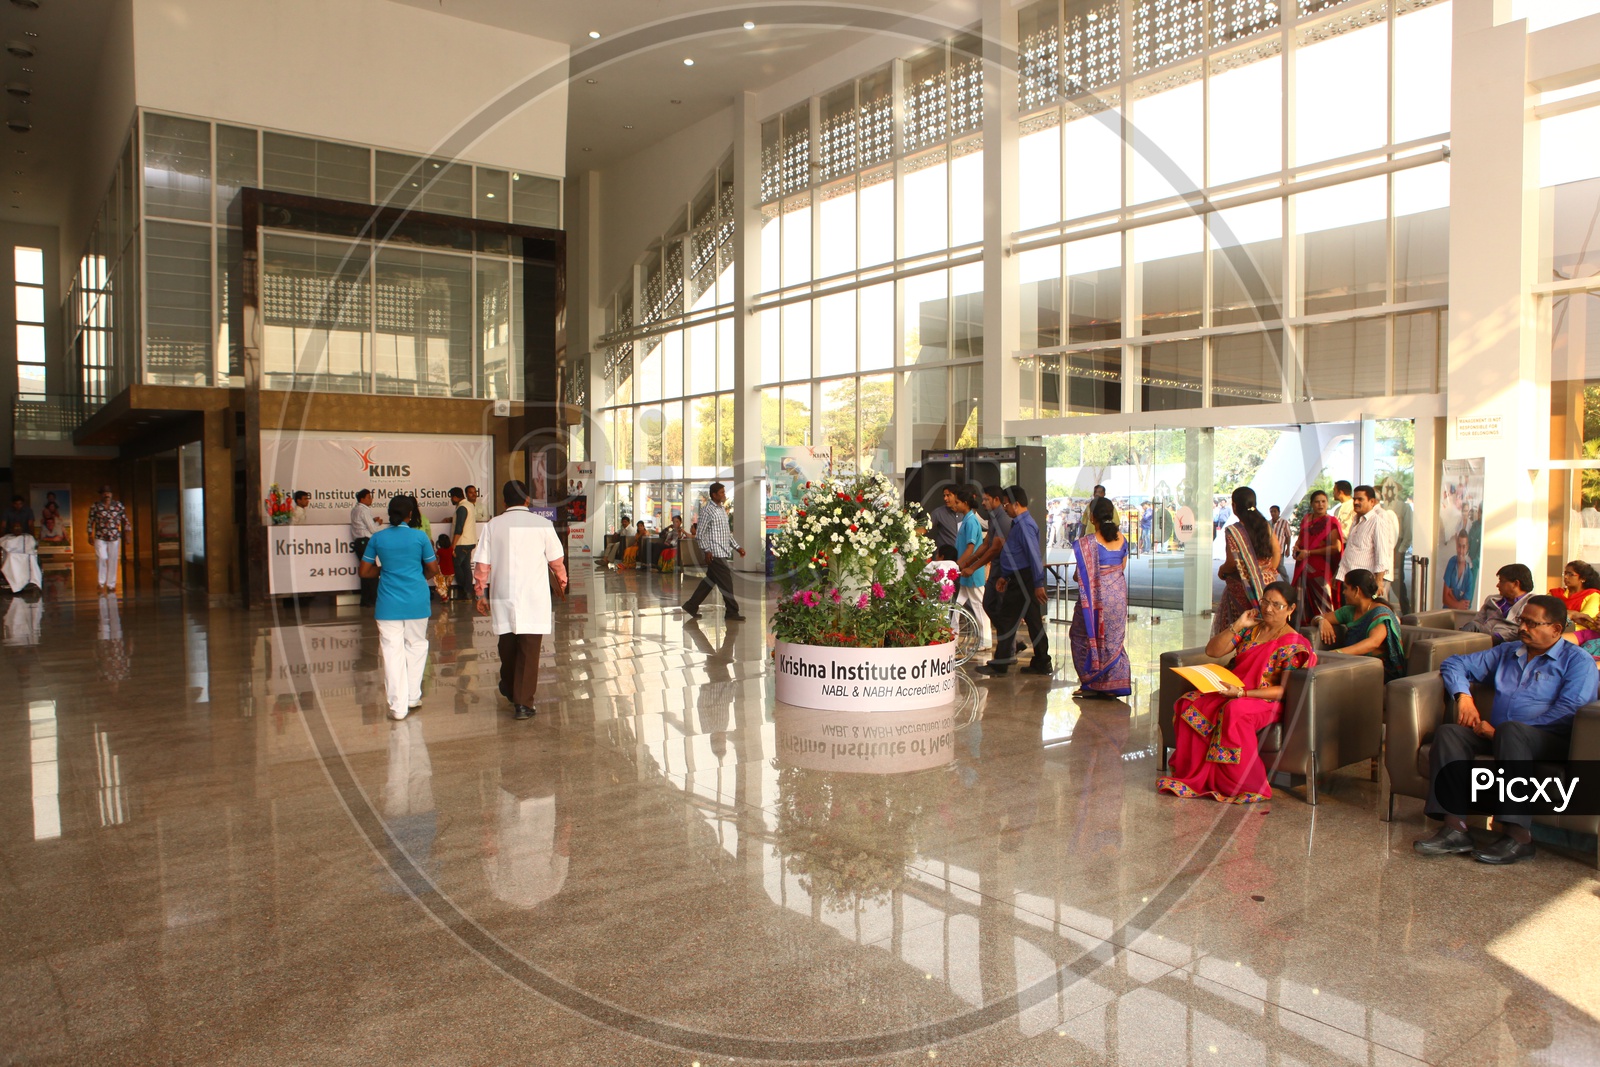 Hospital Reception Floor With Patients Waiting at Chairs